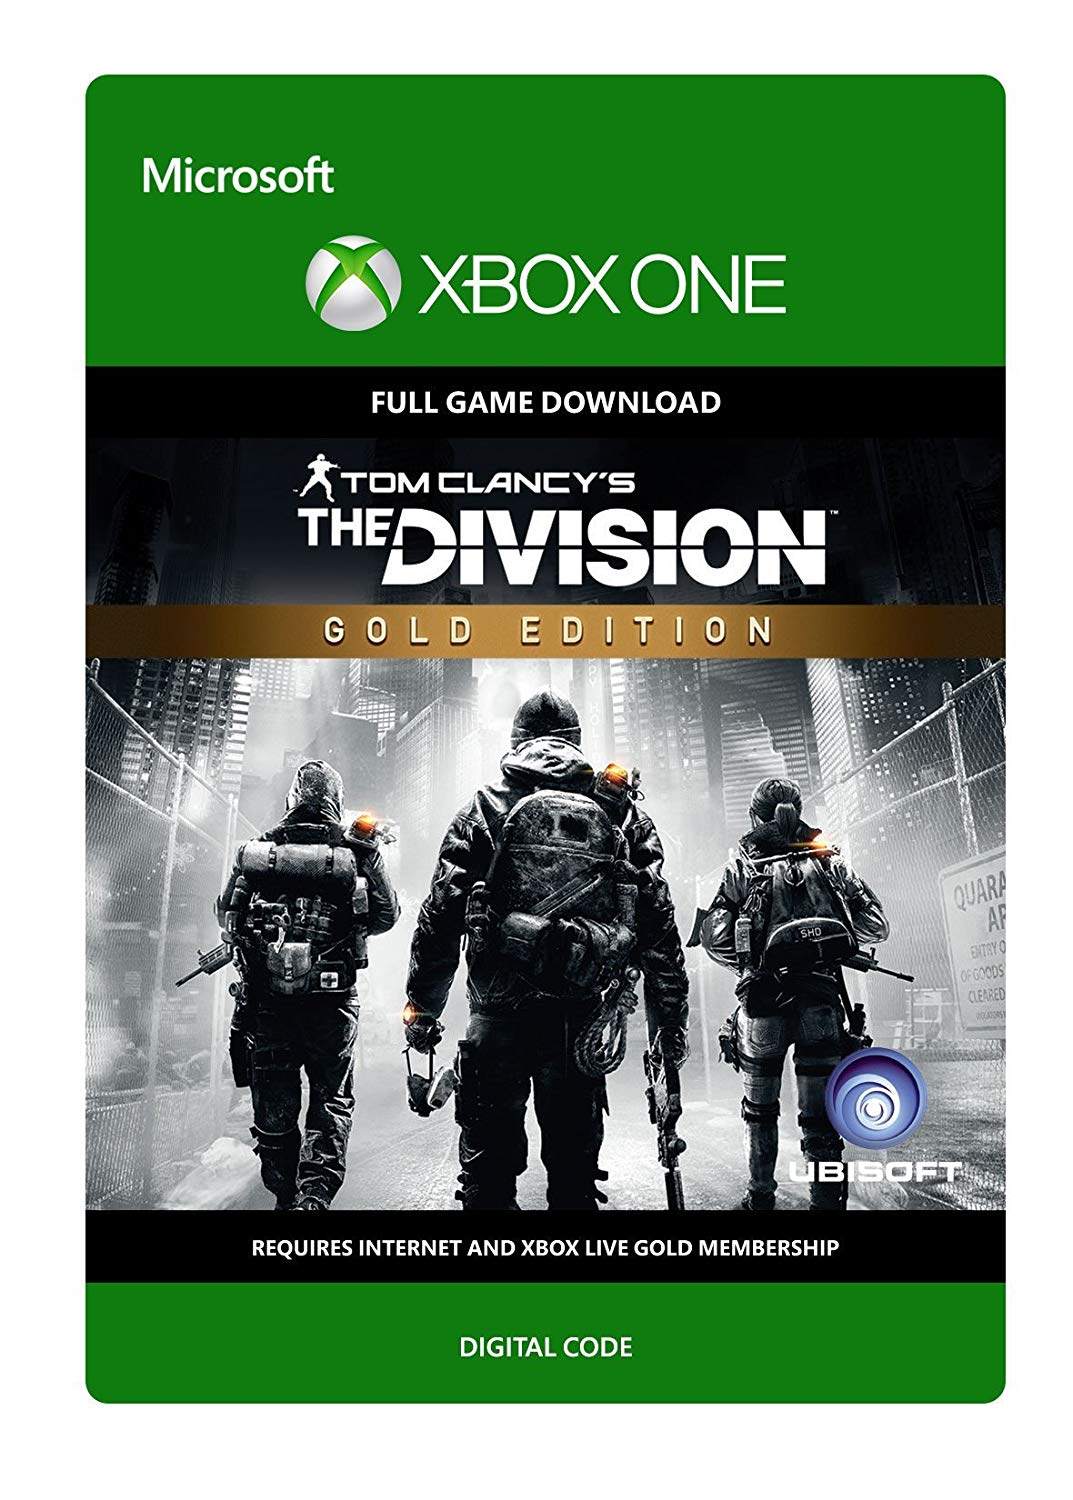 Supermarkt bolvormig Overgave Tom Clancy's The Division Gold Edition CD Key for Xbox One (Digital  Download)